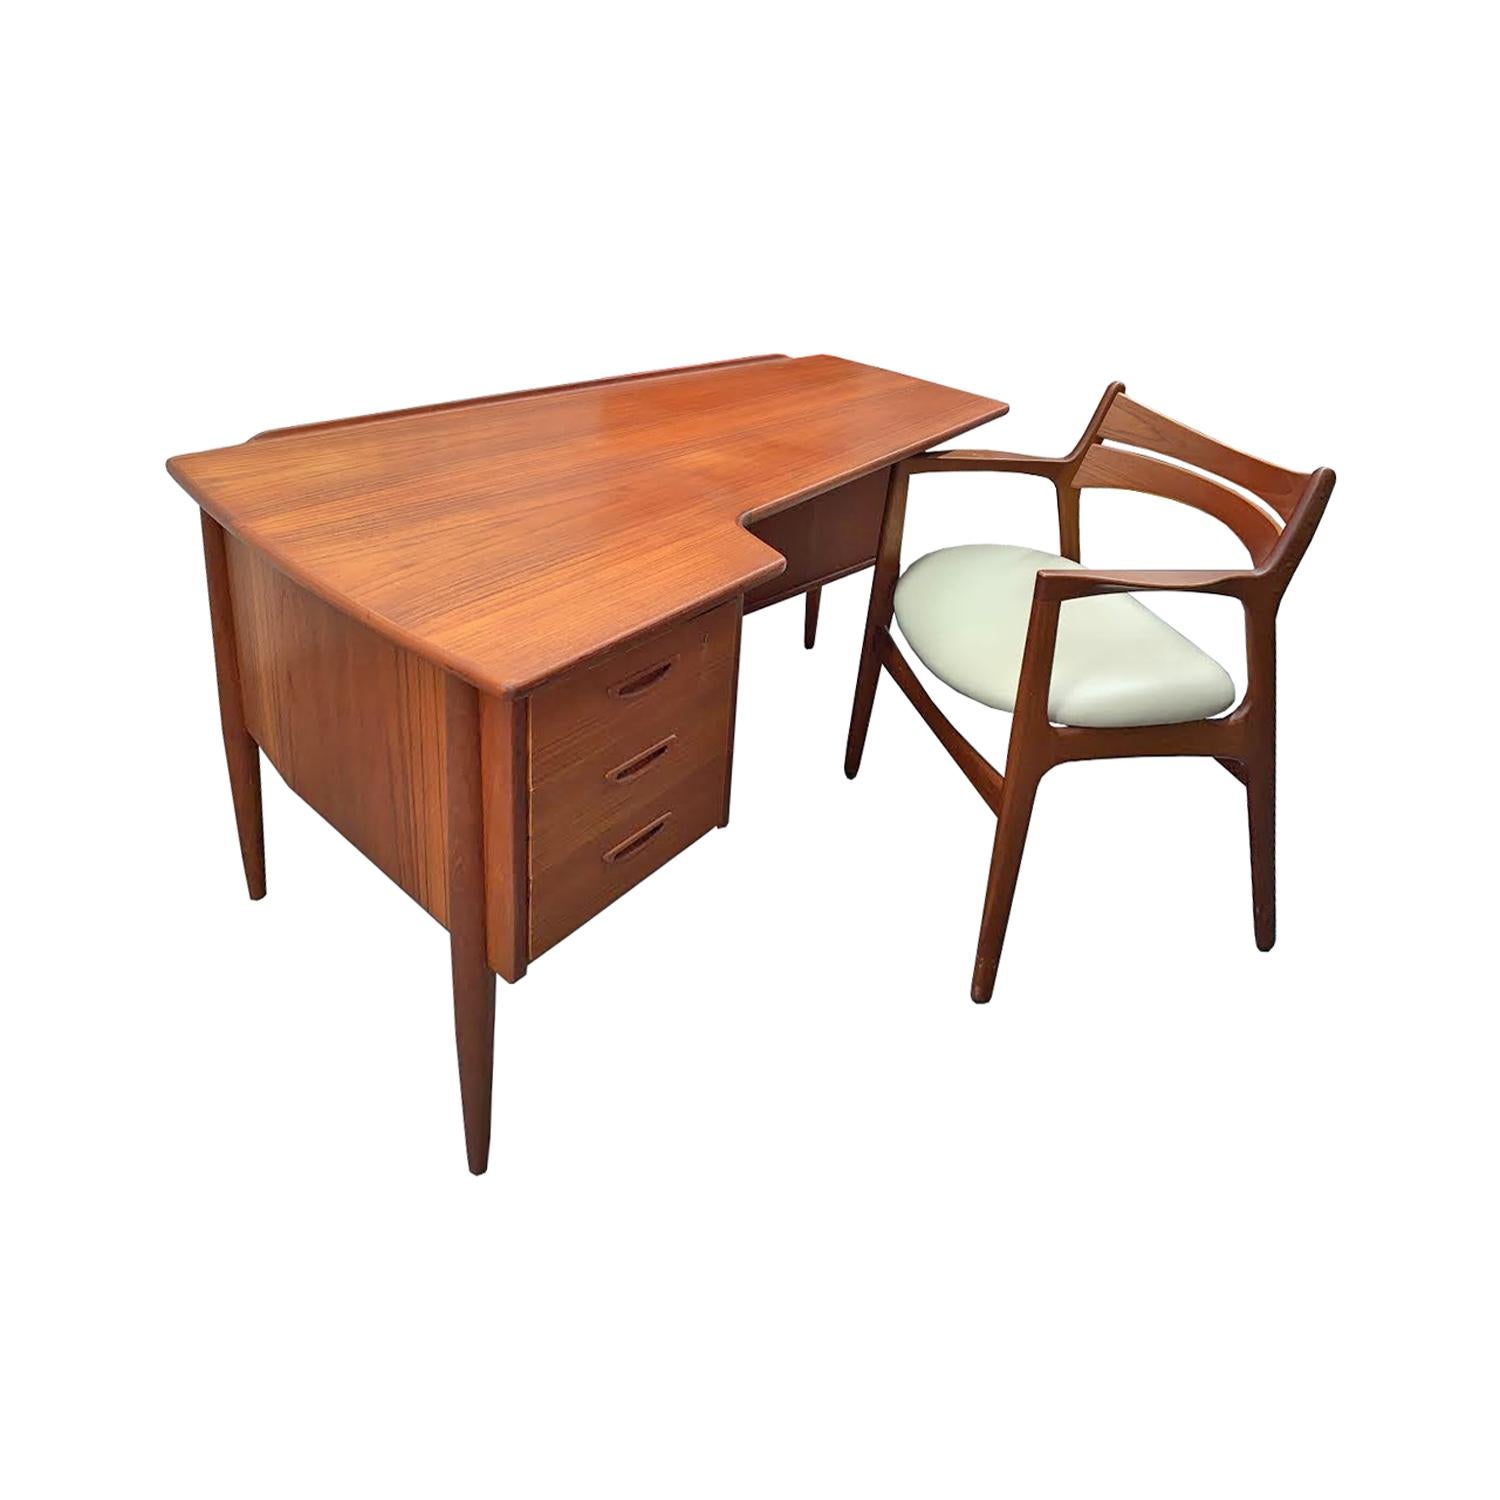 Stylish Danish Desk Chair in Teak, 1950s 'Signed' In Excellent Condition For Sale In New York, NY